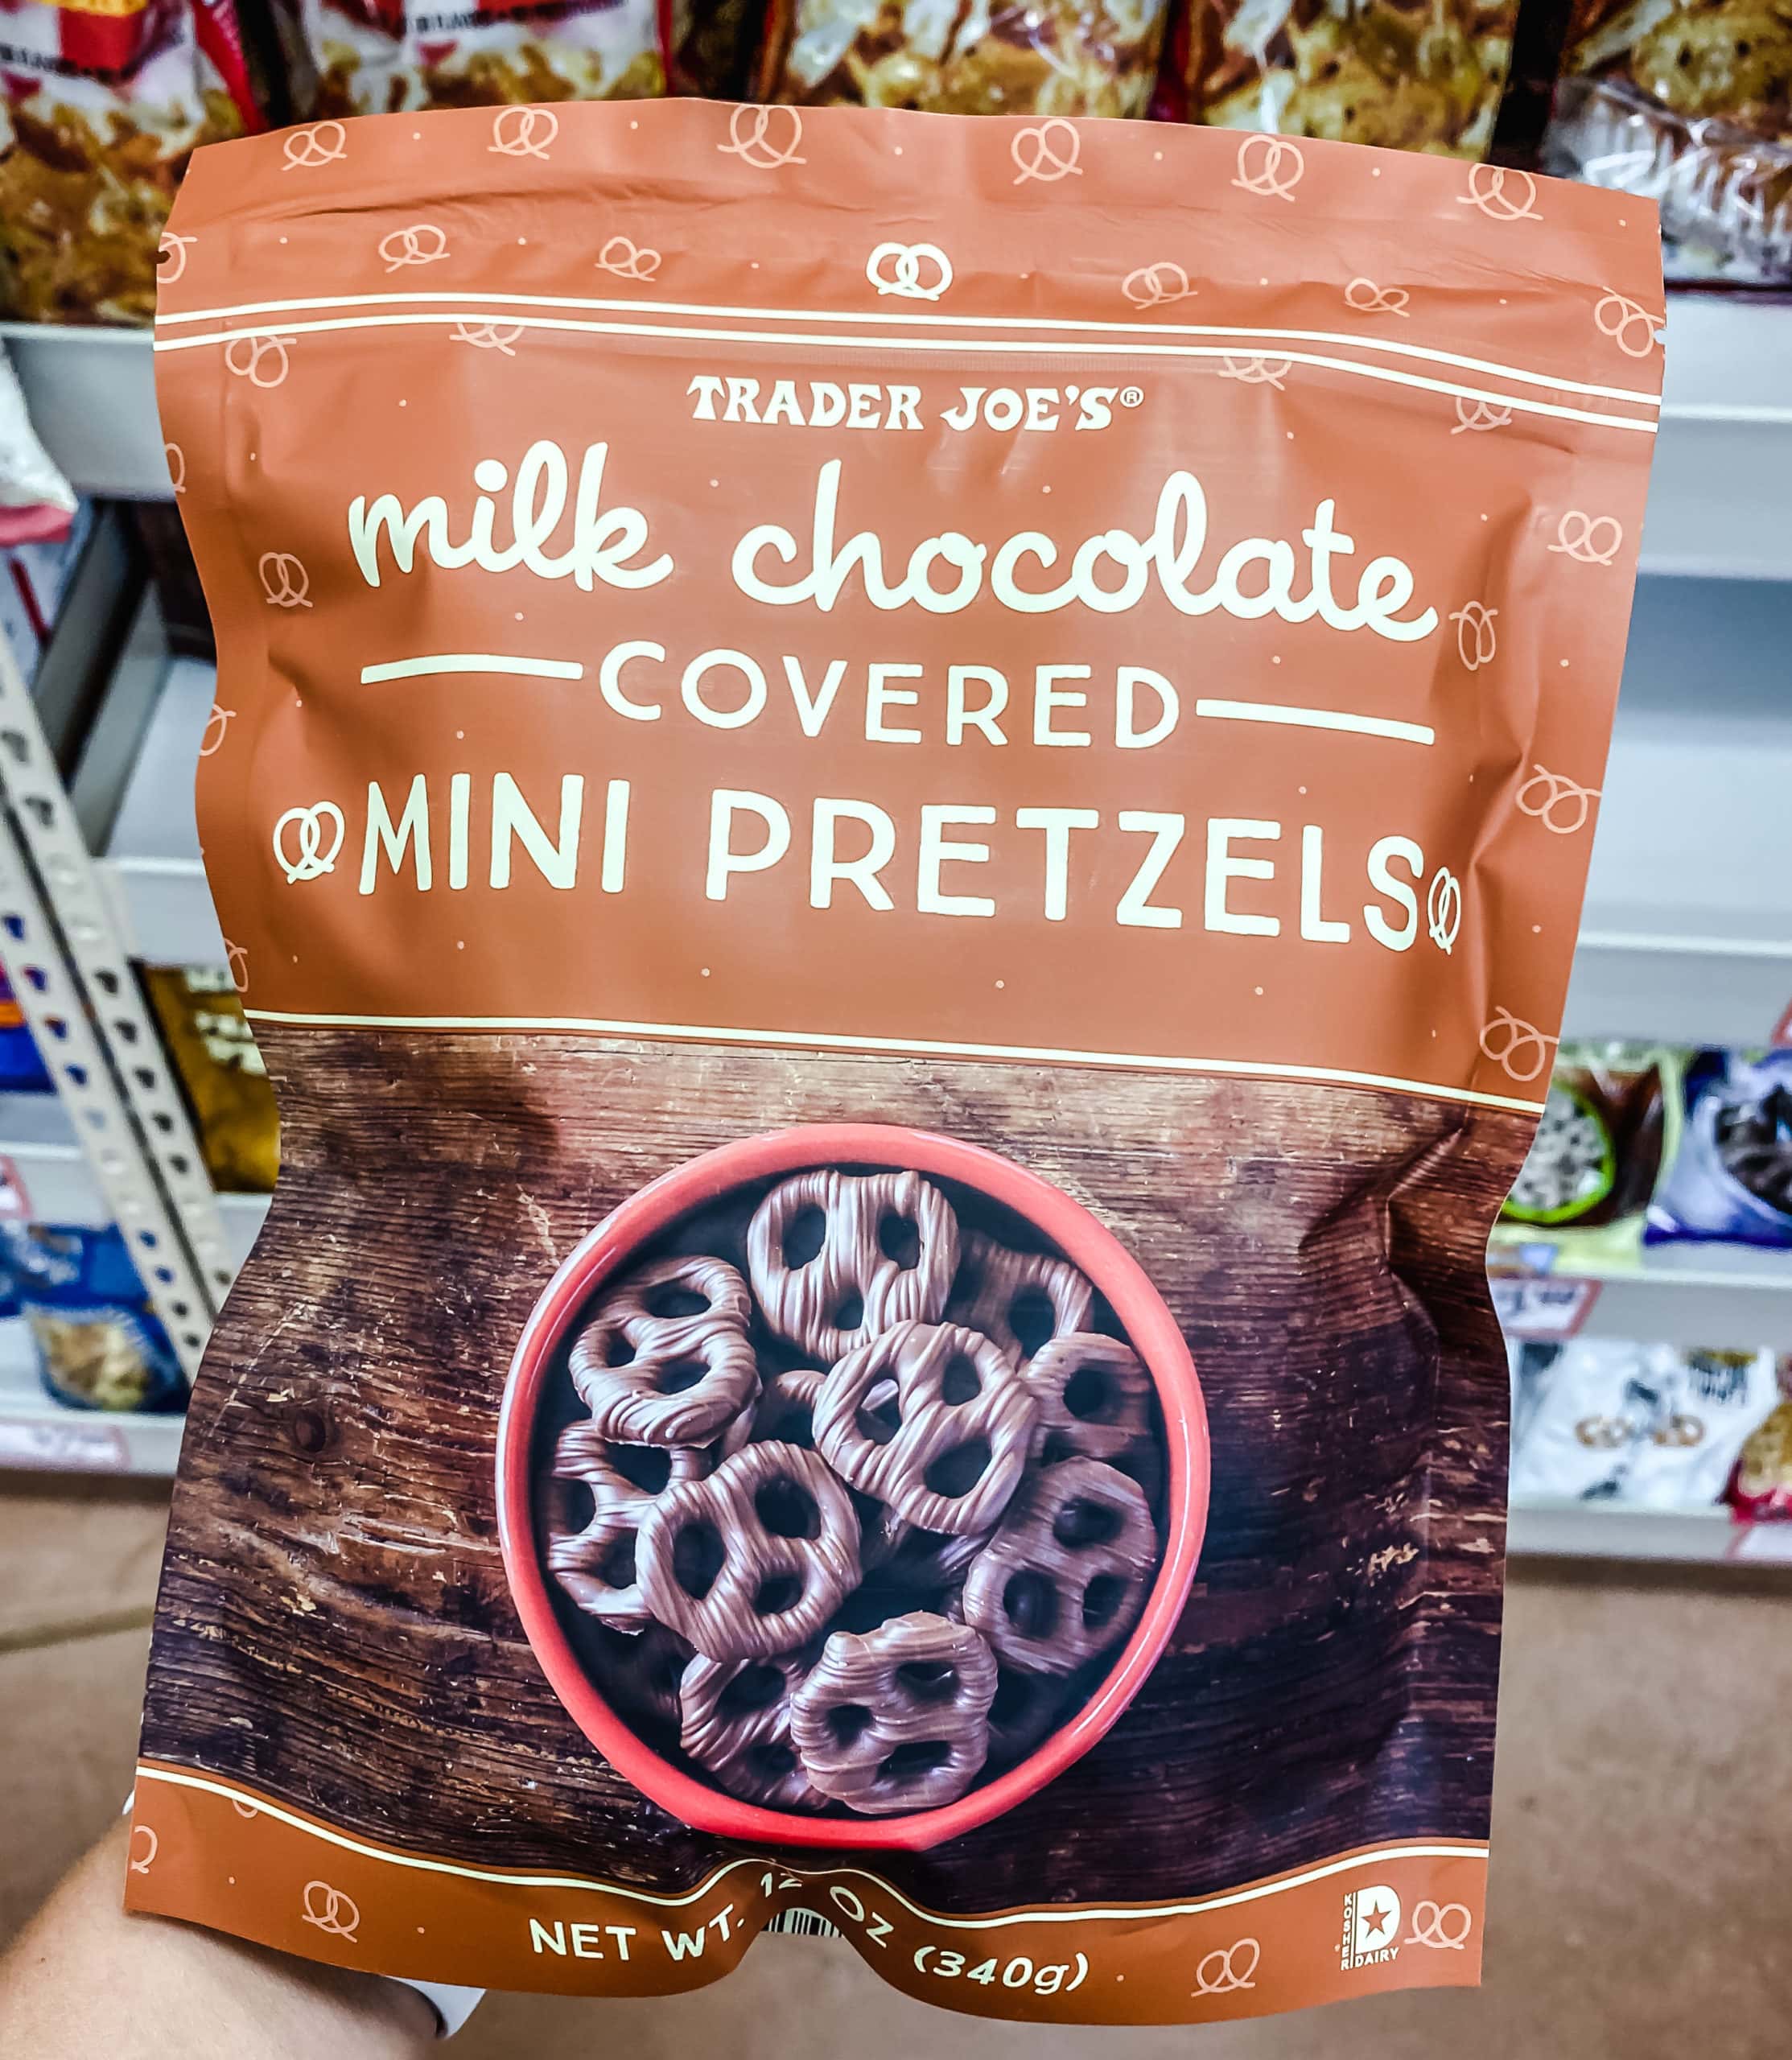 Milk Chocolate Covered Mini Pretzels from Trader Joe's. The Best Foods to Buy at Trader Joe's.